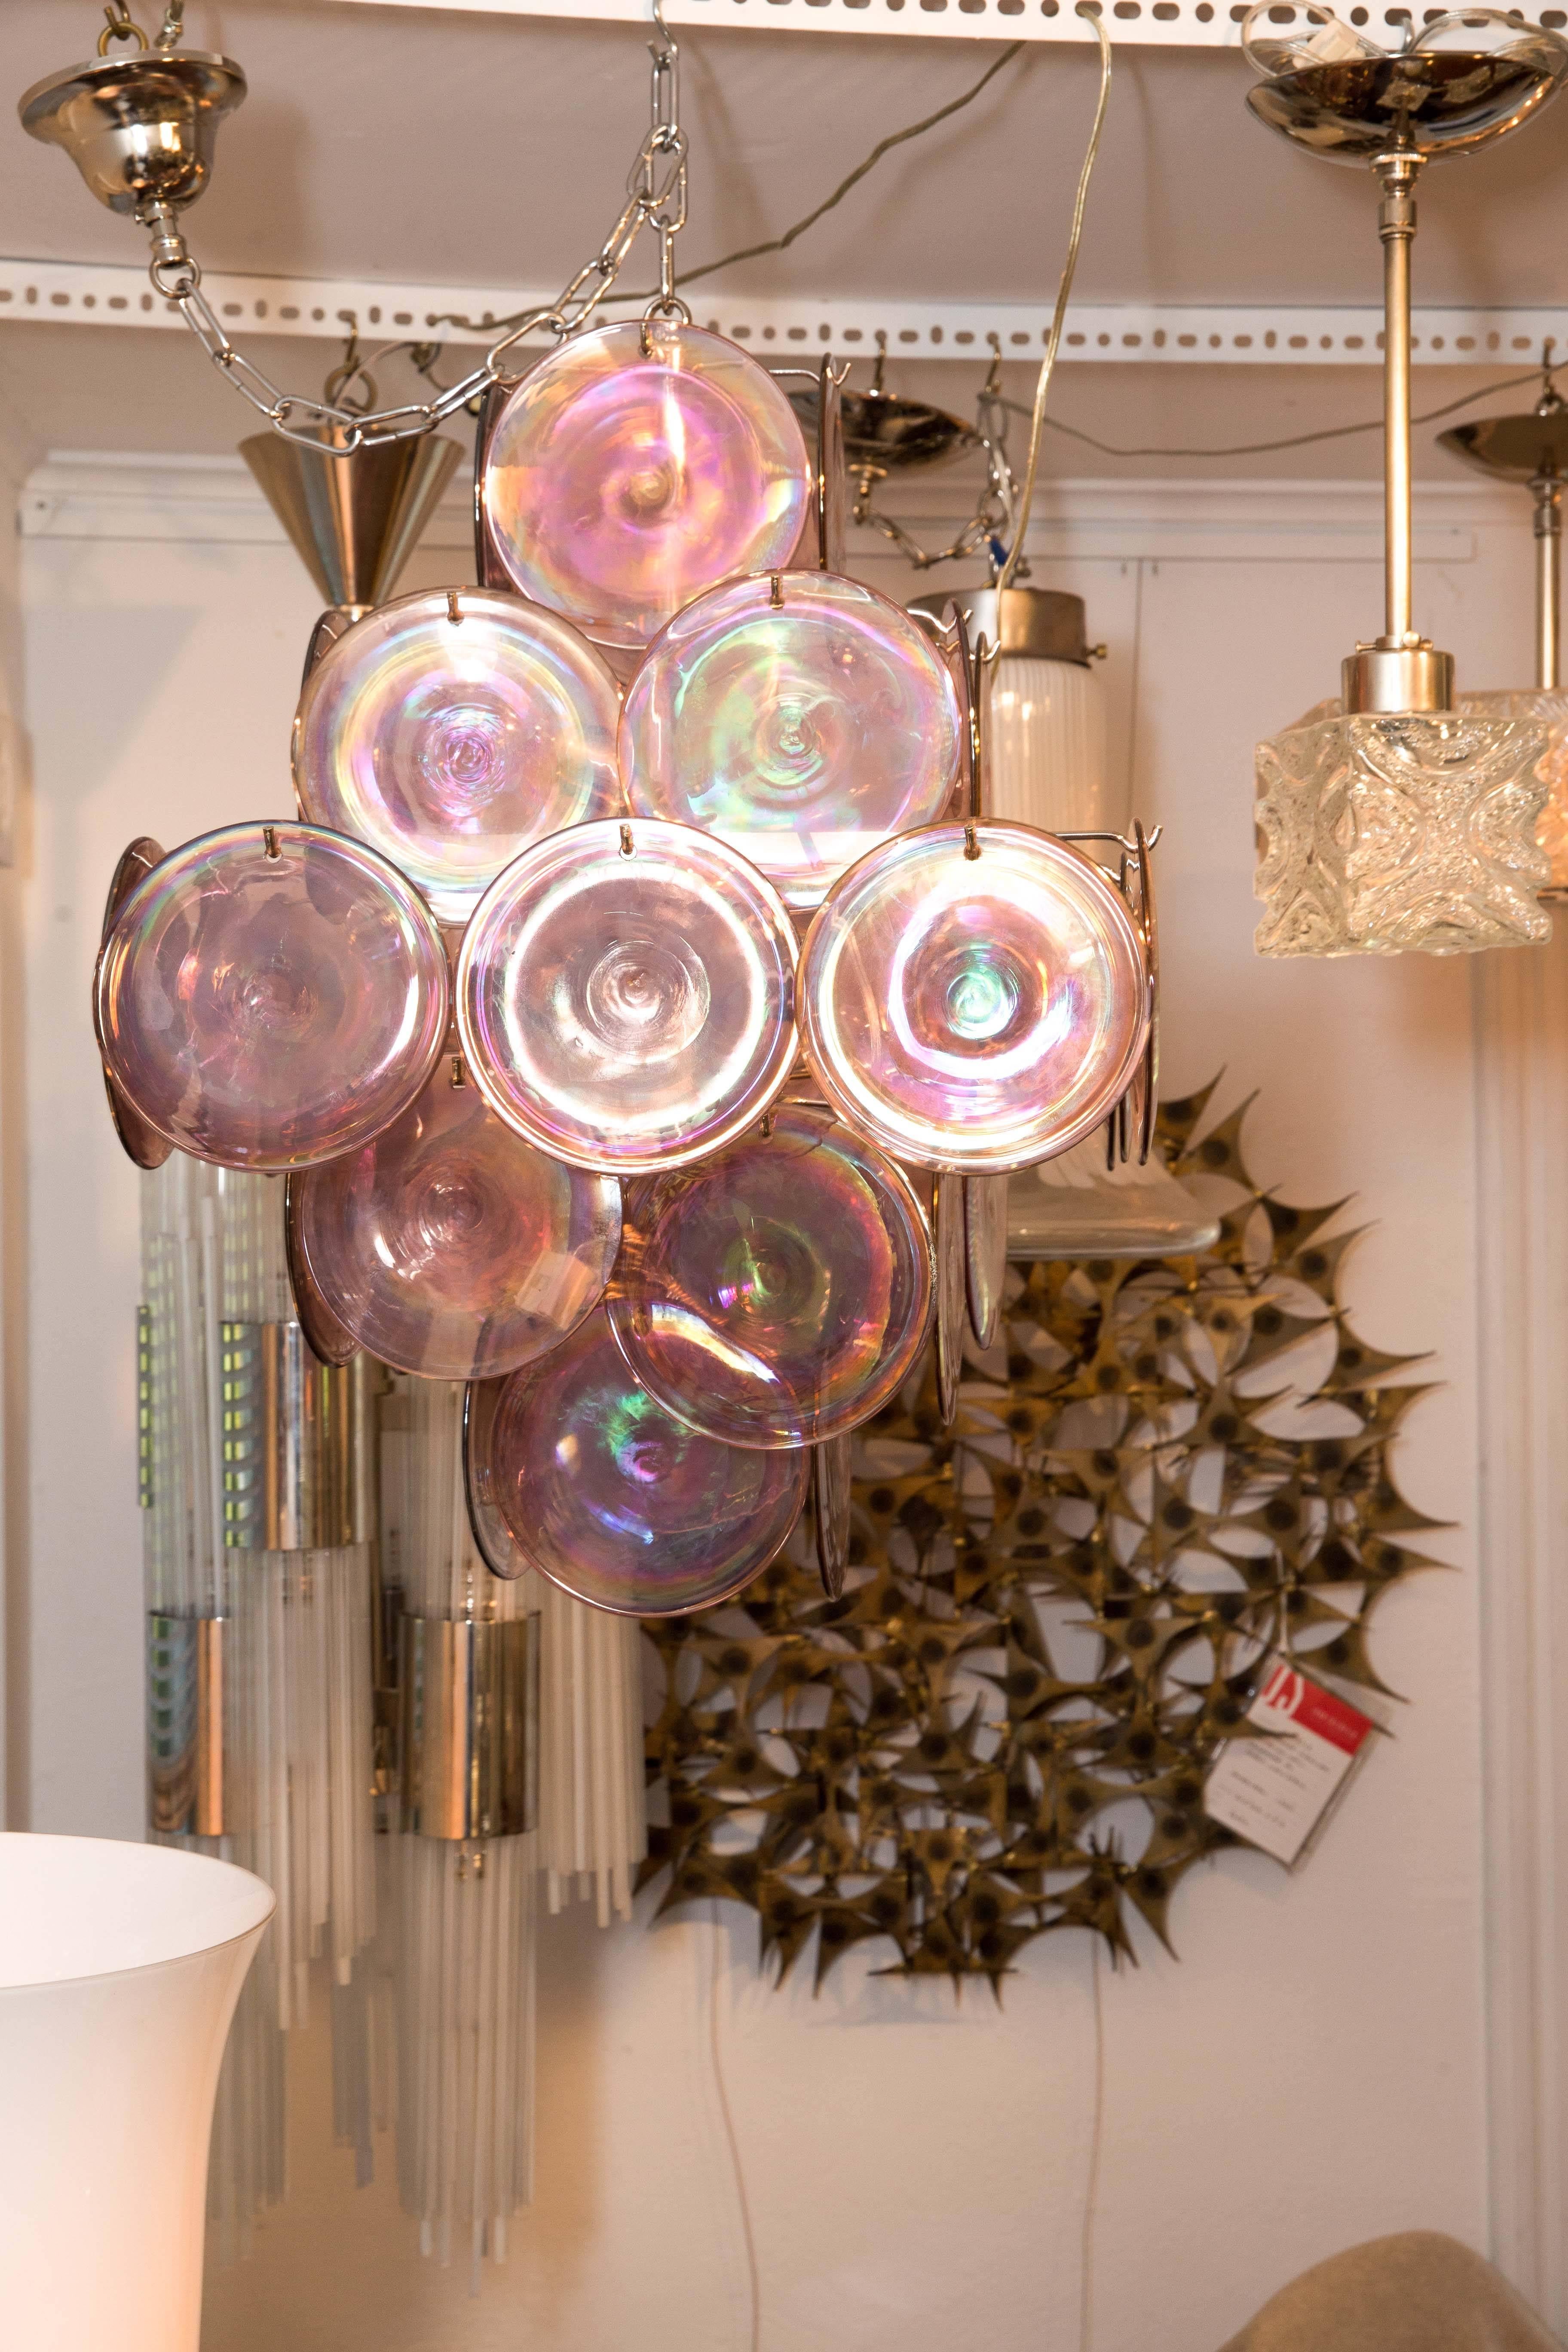 Nickel chandelier composed of 36 layered purple glass disks by Vistosi
(five candelabra lights.).